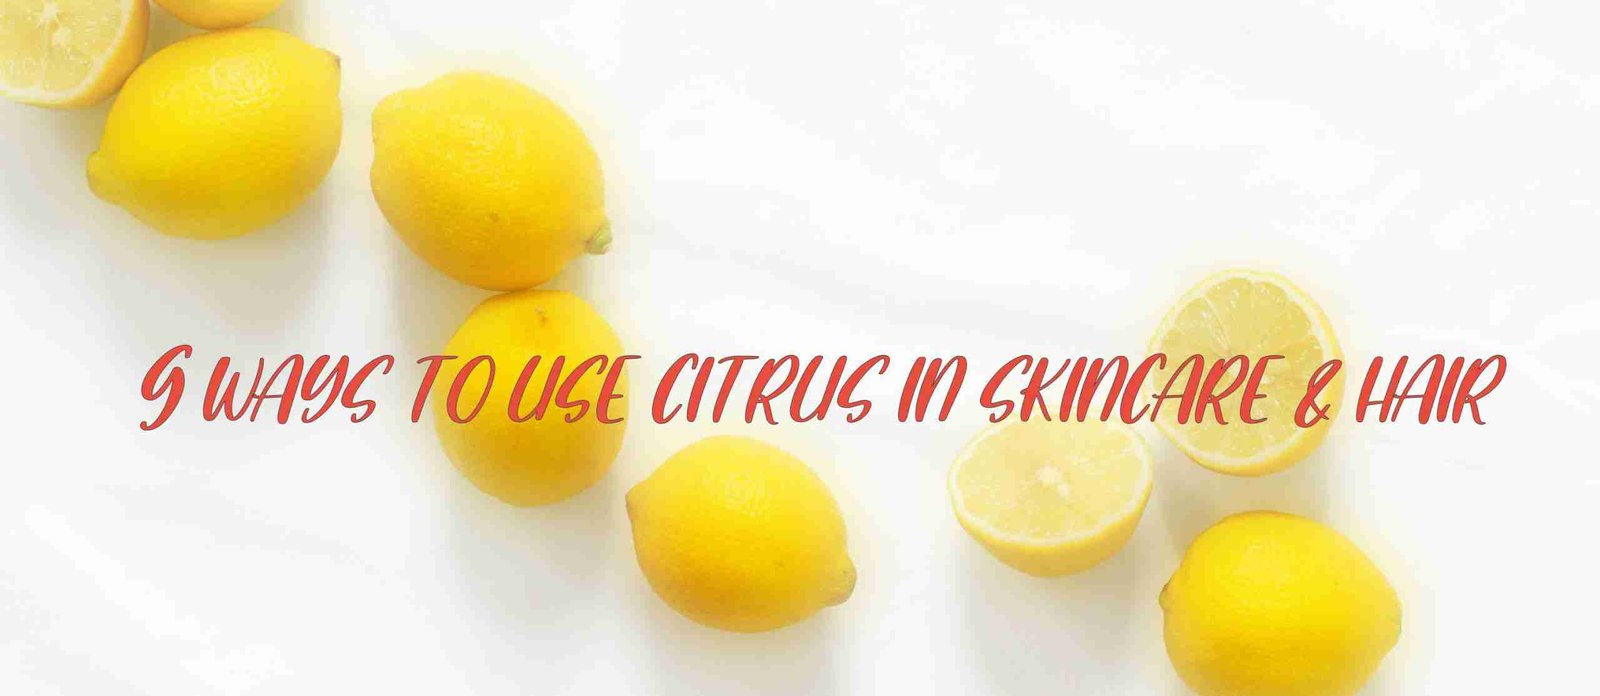 Nine Ways to Use Citrus for Your Hair and Skincare